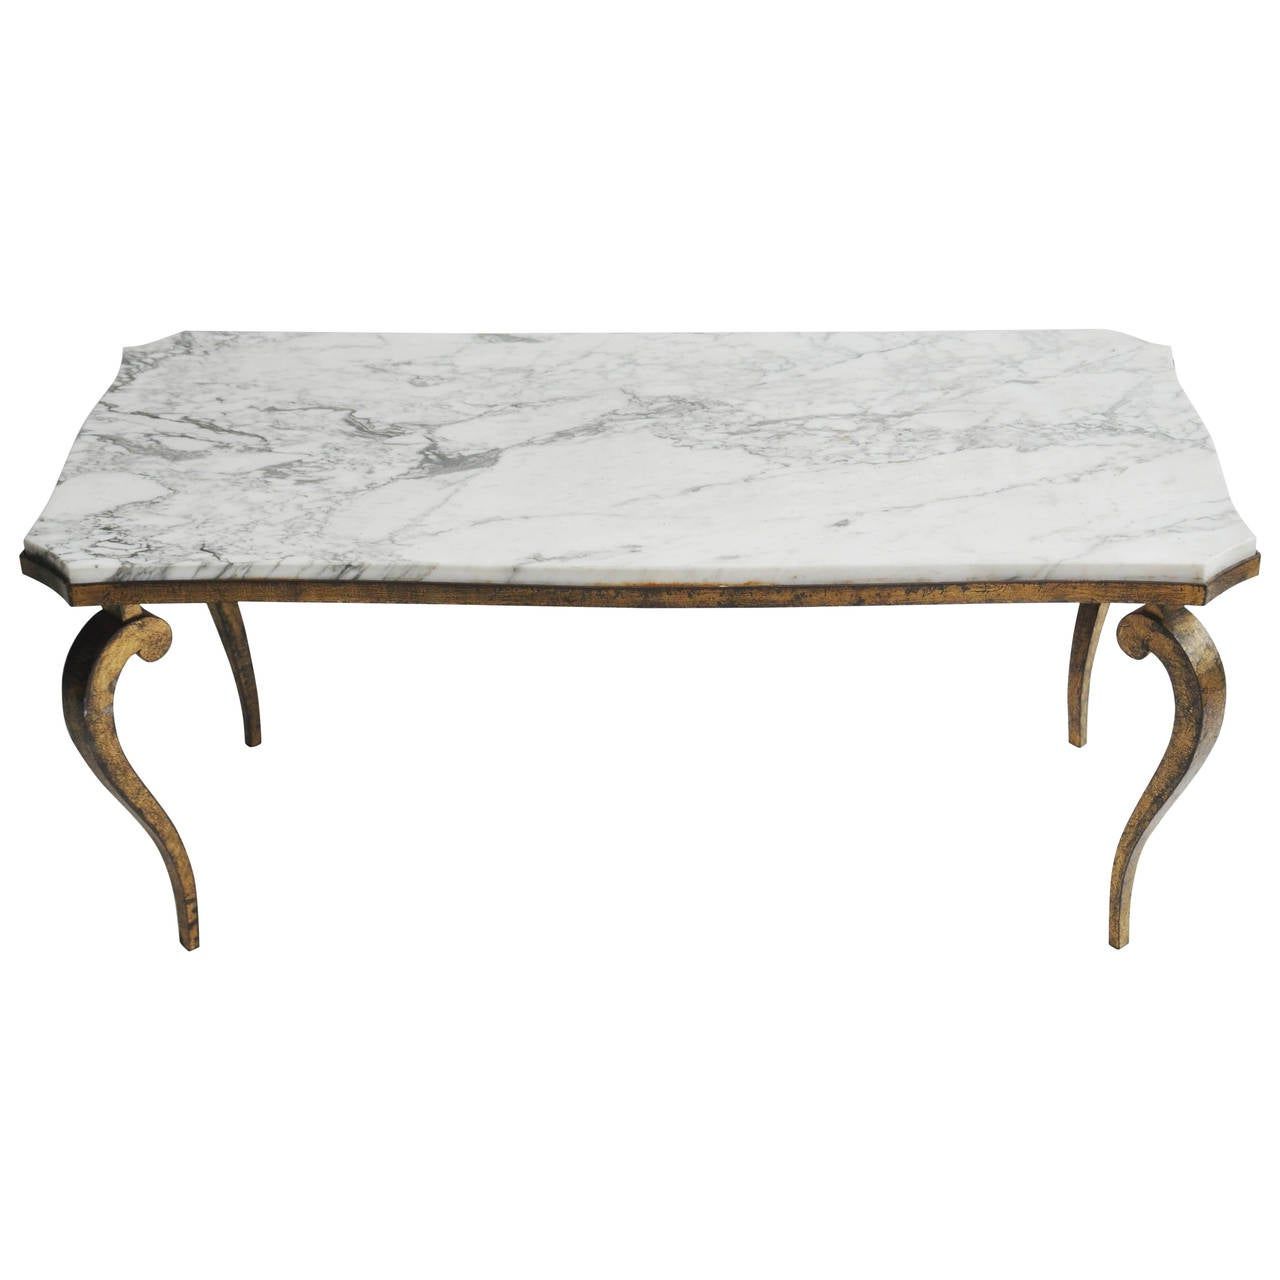 Marble And Gold Leaf Cabriole Leg Coffee Tableramsay With Best And Newest Antiqued Gold Leaf Coffee Tables (Gallery 8 of 20)